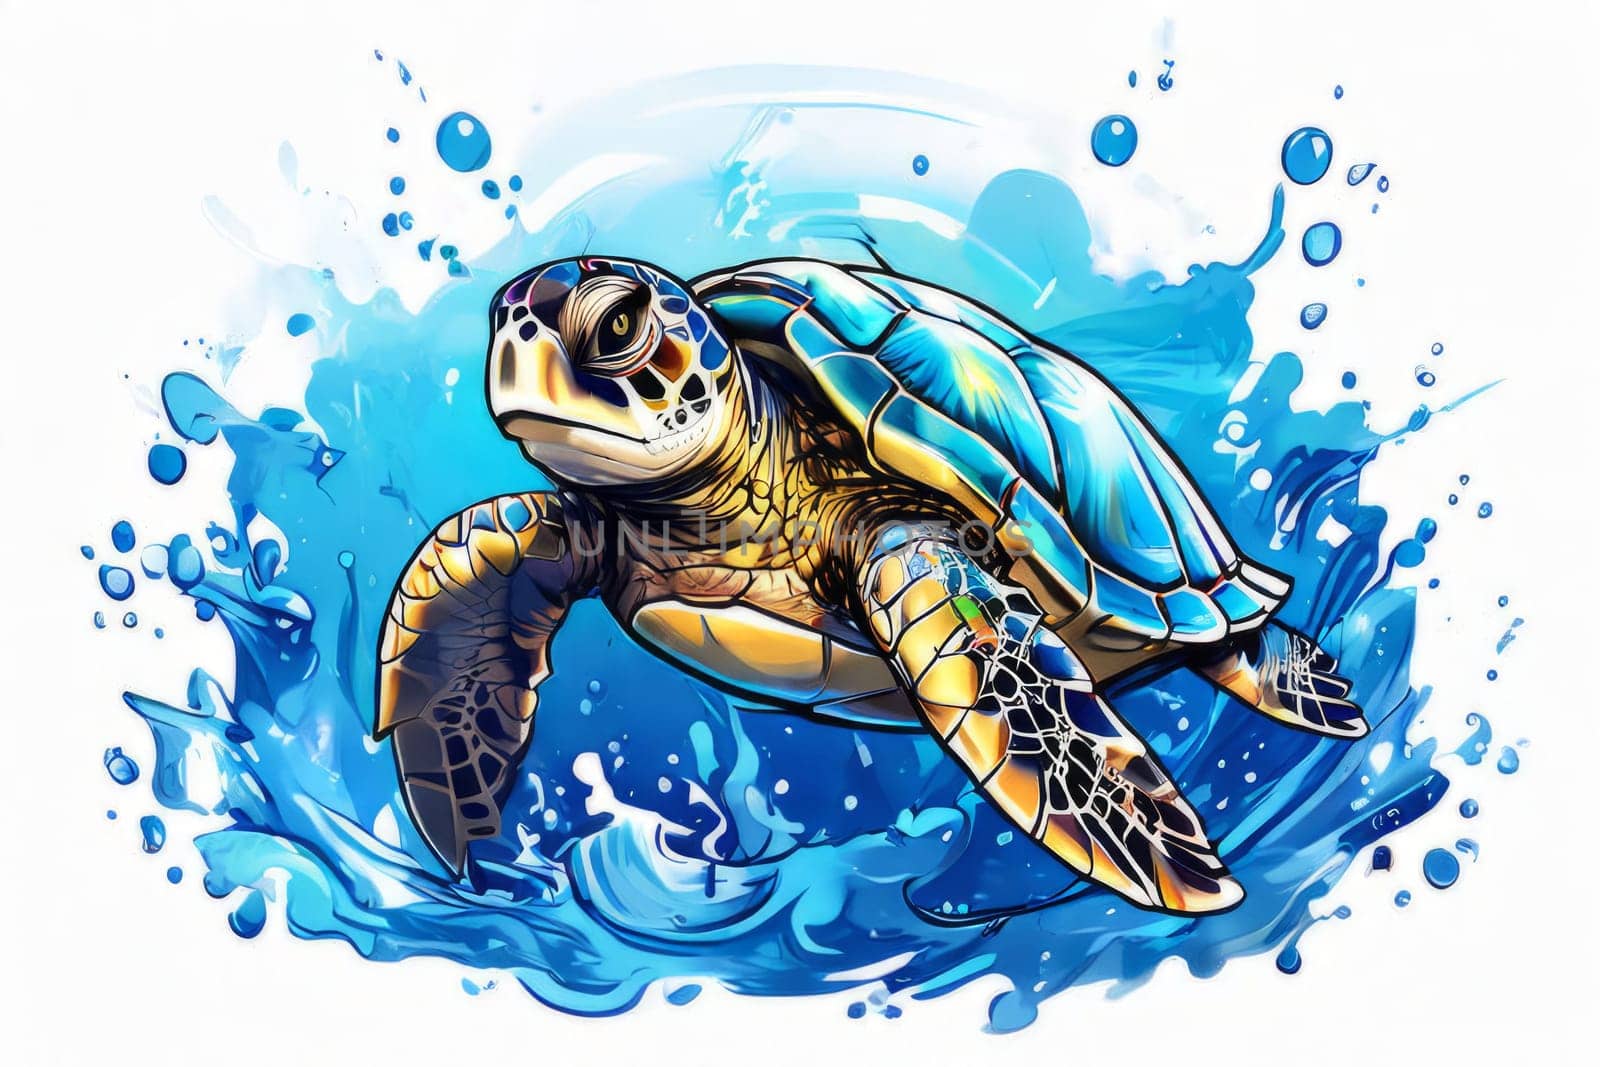 Turtle glides through its aquatic environment, showcasing beauty, tranquility of underwater world. For Tshirt design, posters, postcards, other merchandise with marine theme, childrens books, tourism. by Angelsmoon